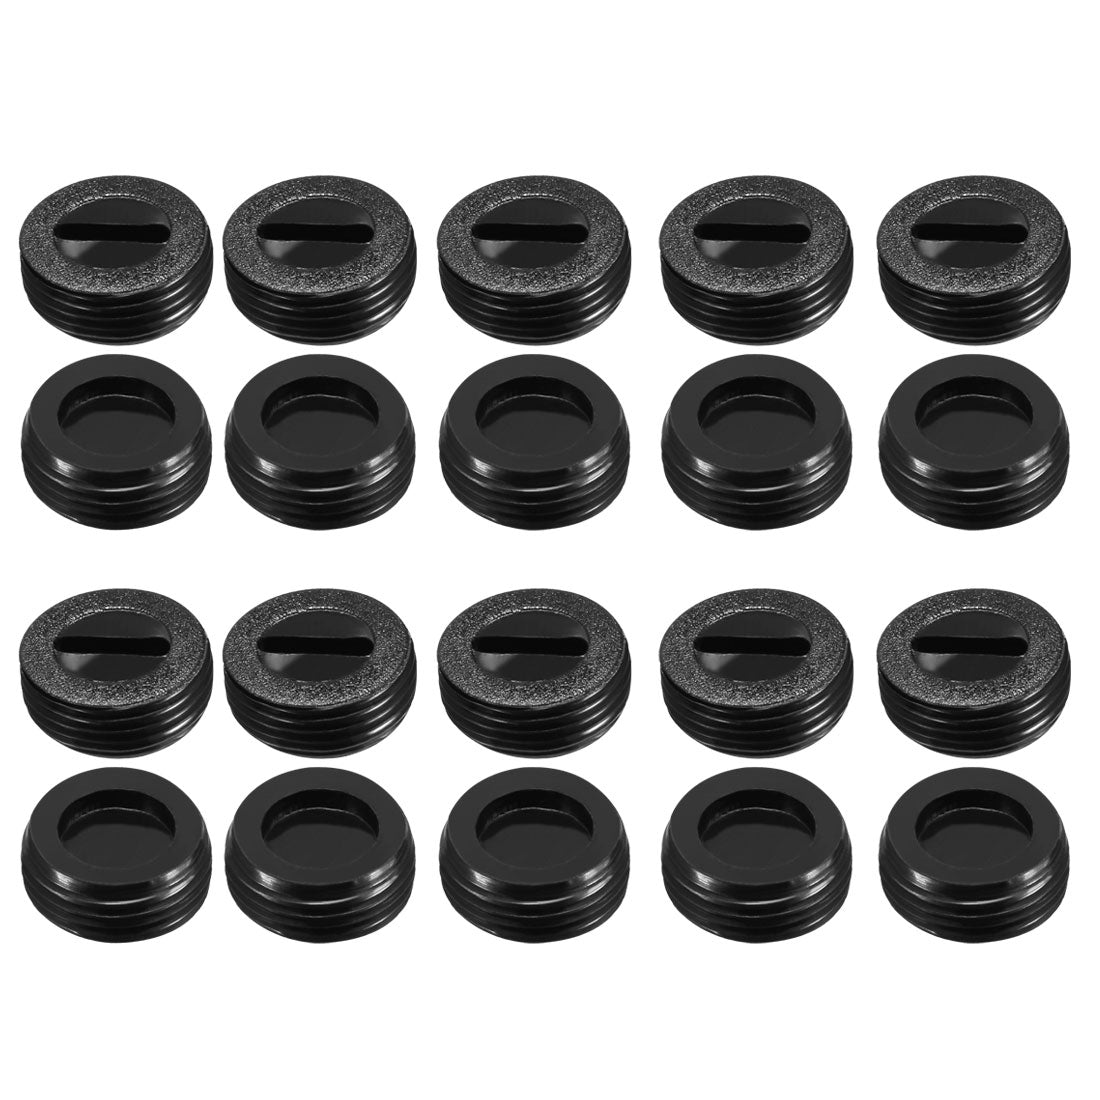 uxcell Uxcell Carbon Brush Holder Caps 13mm O.D. 7mm I.D. 5mm Thickness Motor Brush Cover Plastic Fitting Thread Black 20pcs